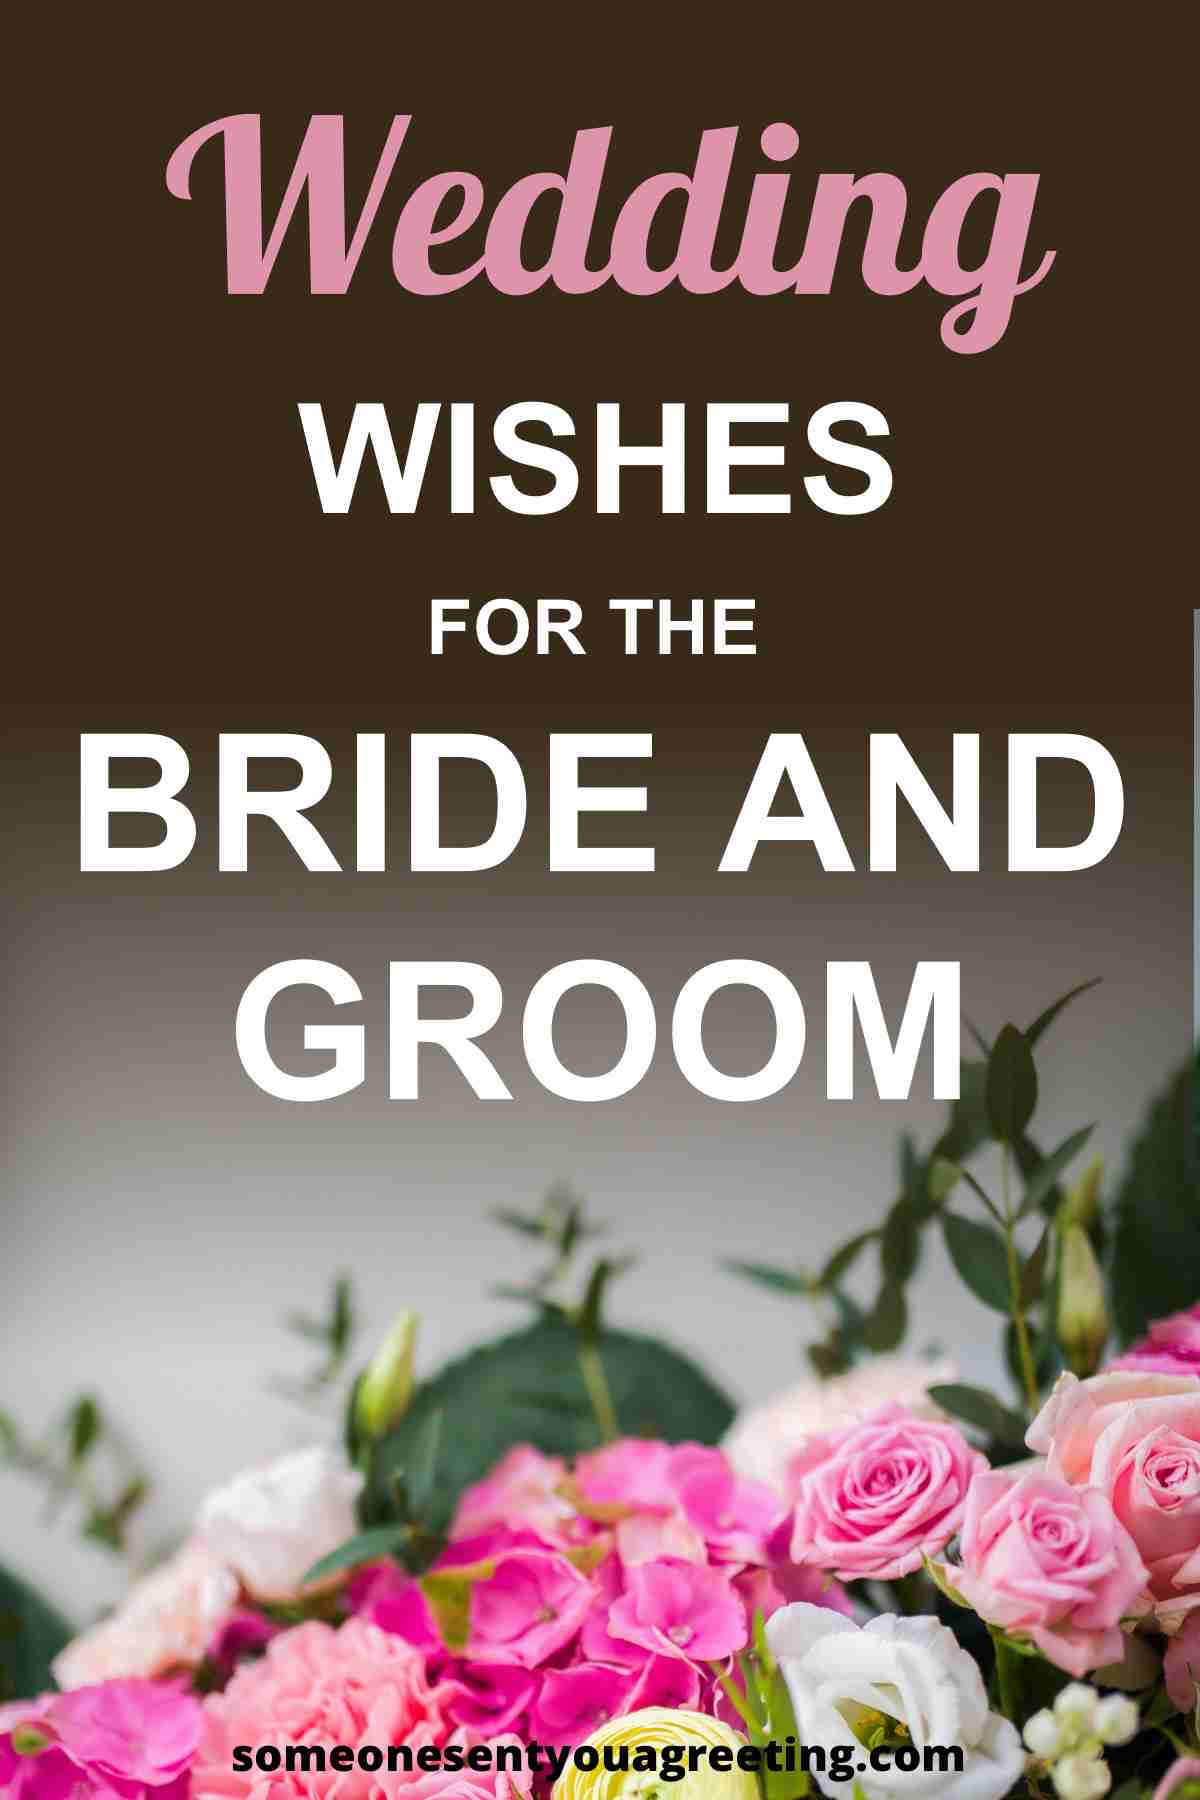 wedding wishes for the bride and groom